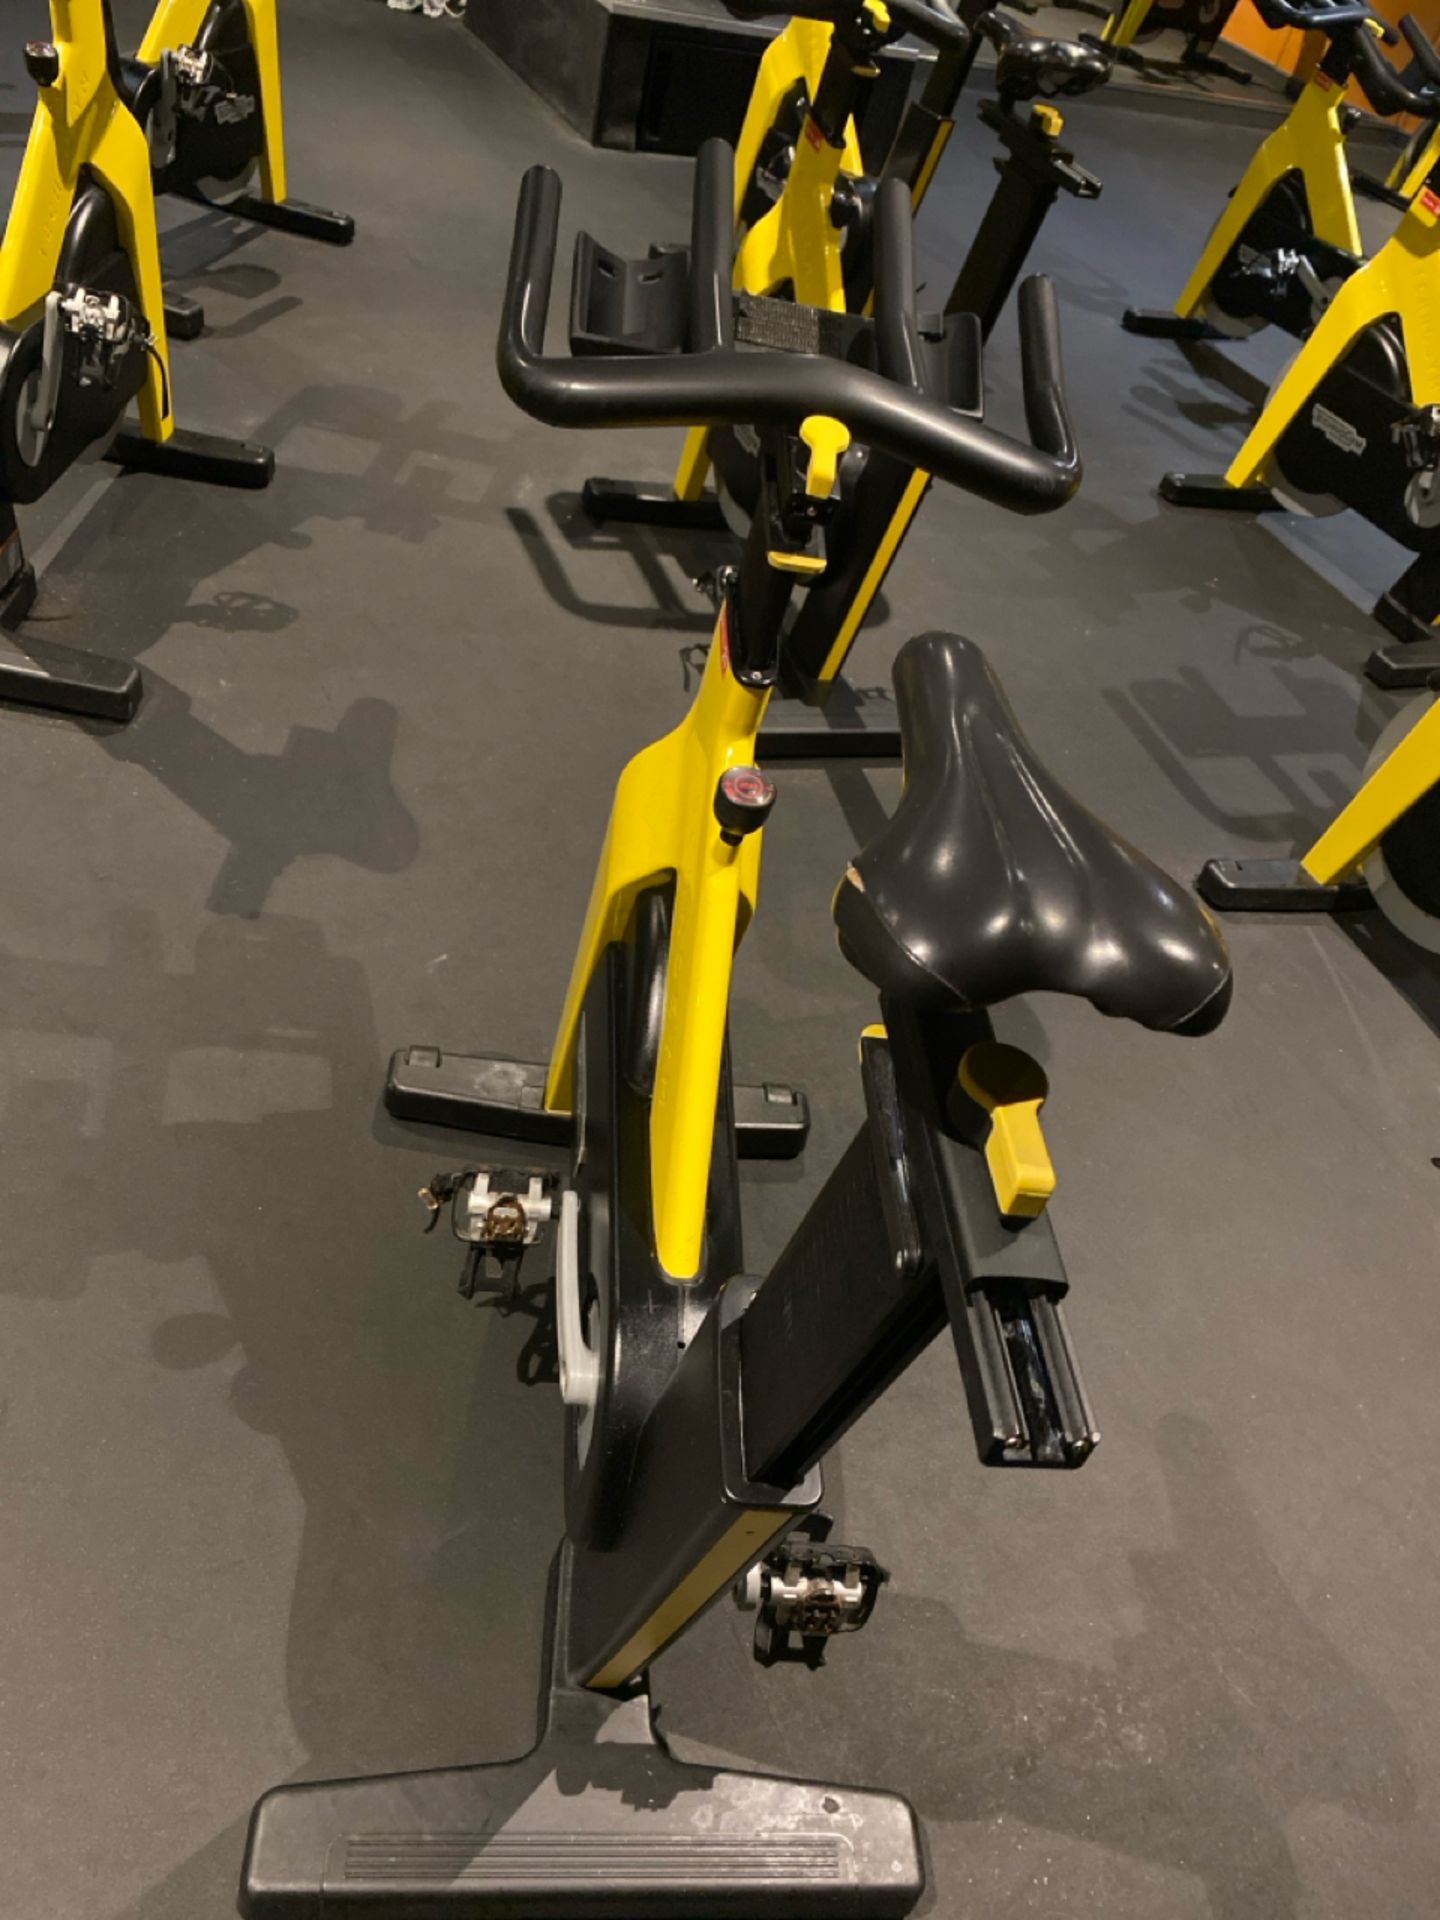 Technogym Group Cycle Ride Spin Bike - Image 6 of 8